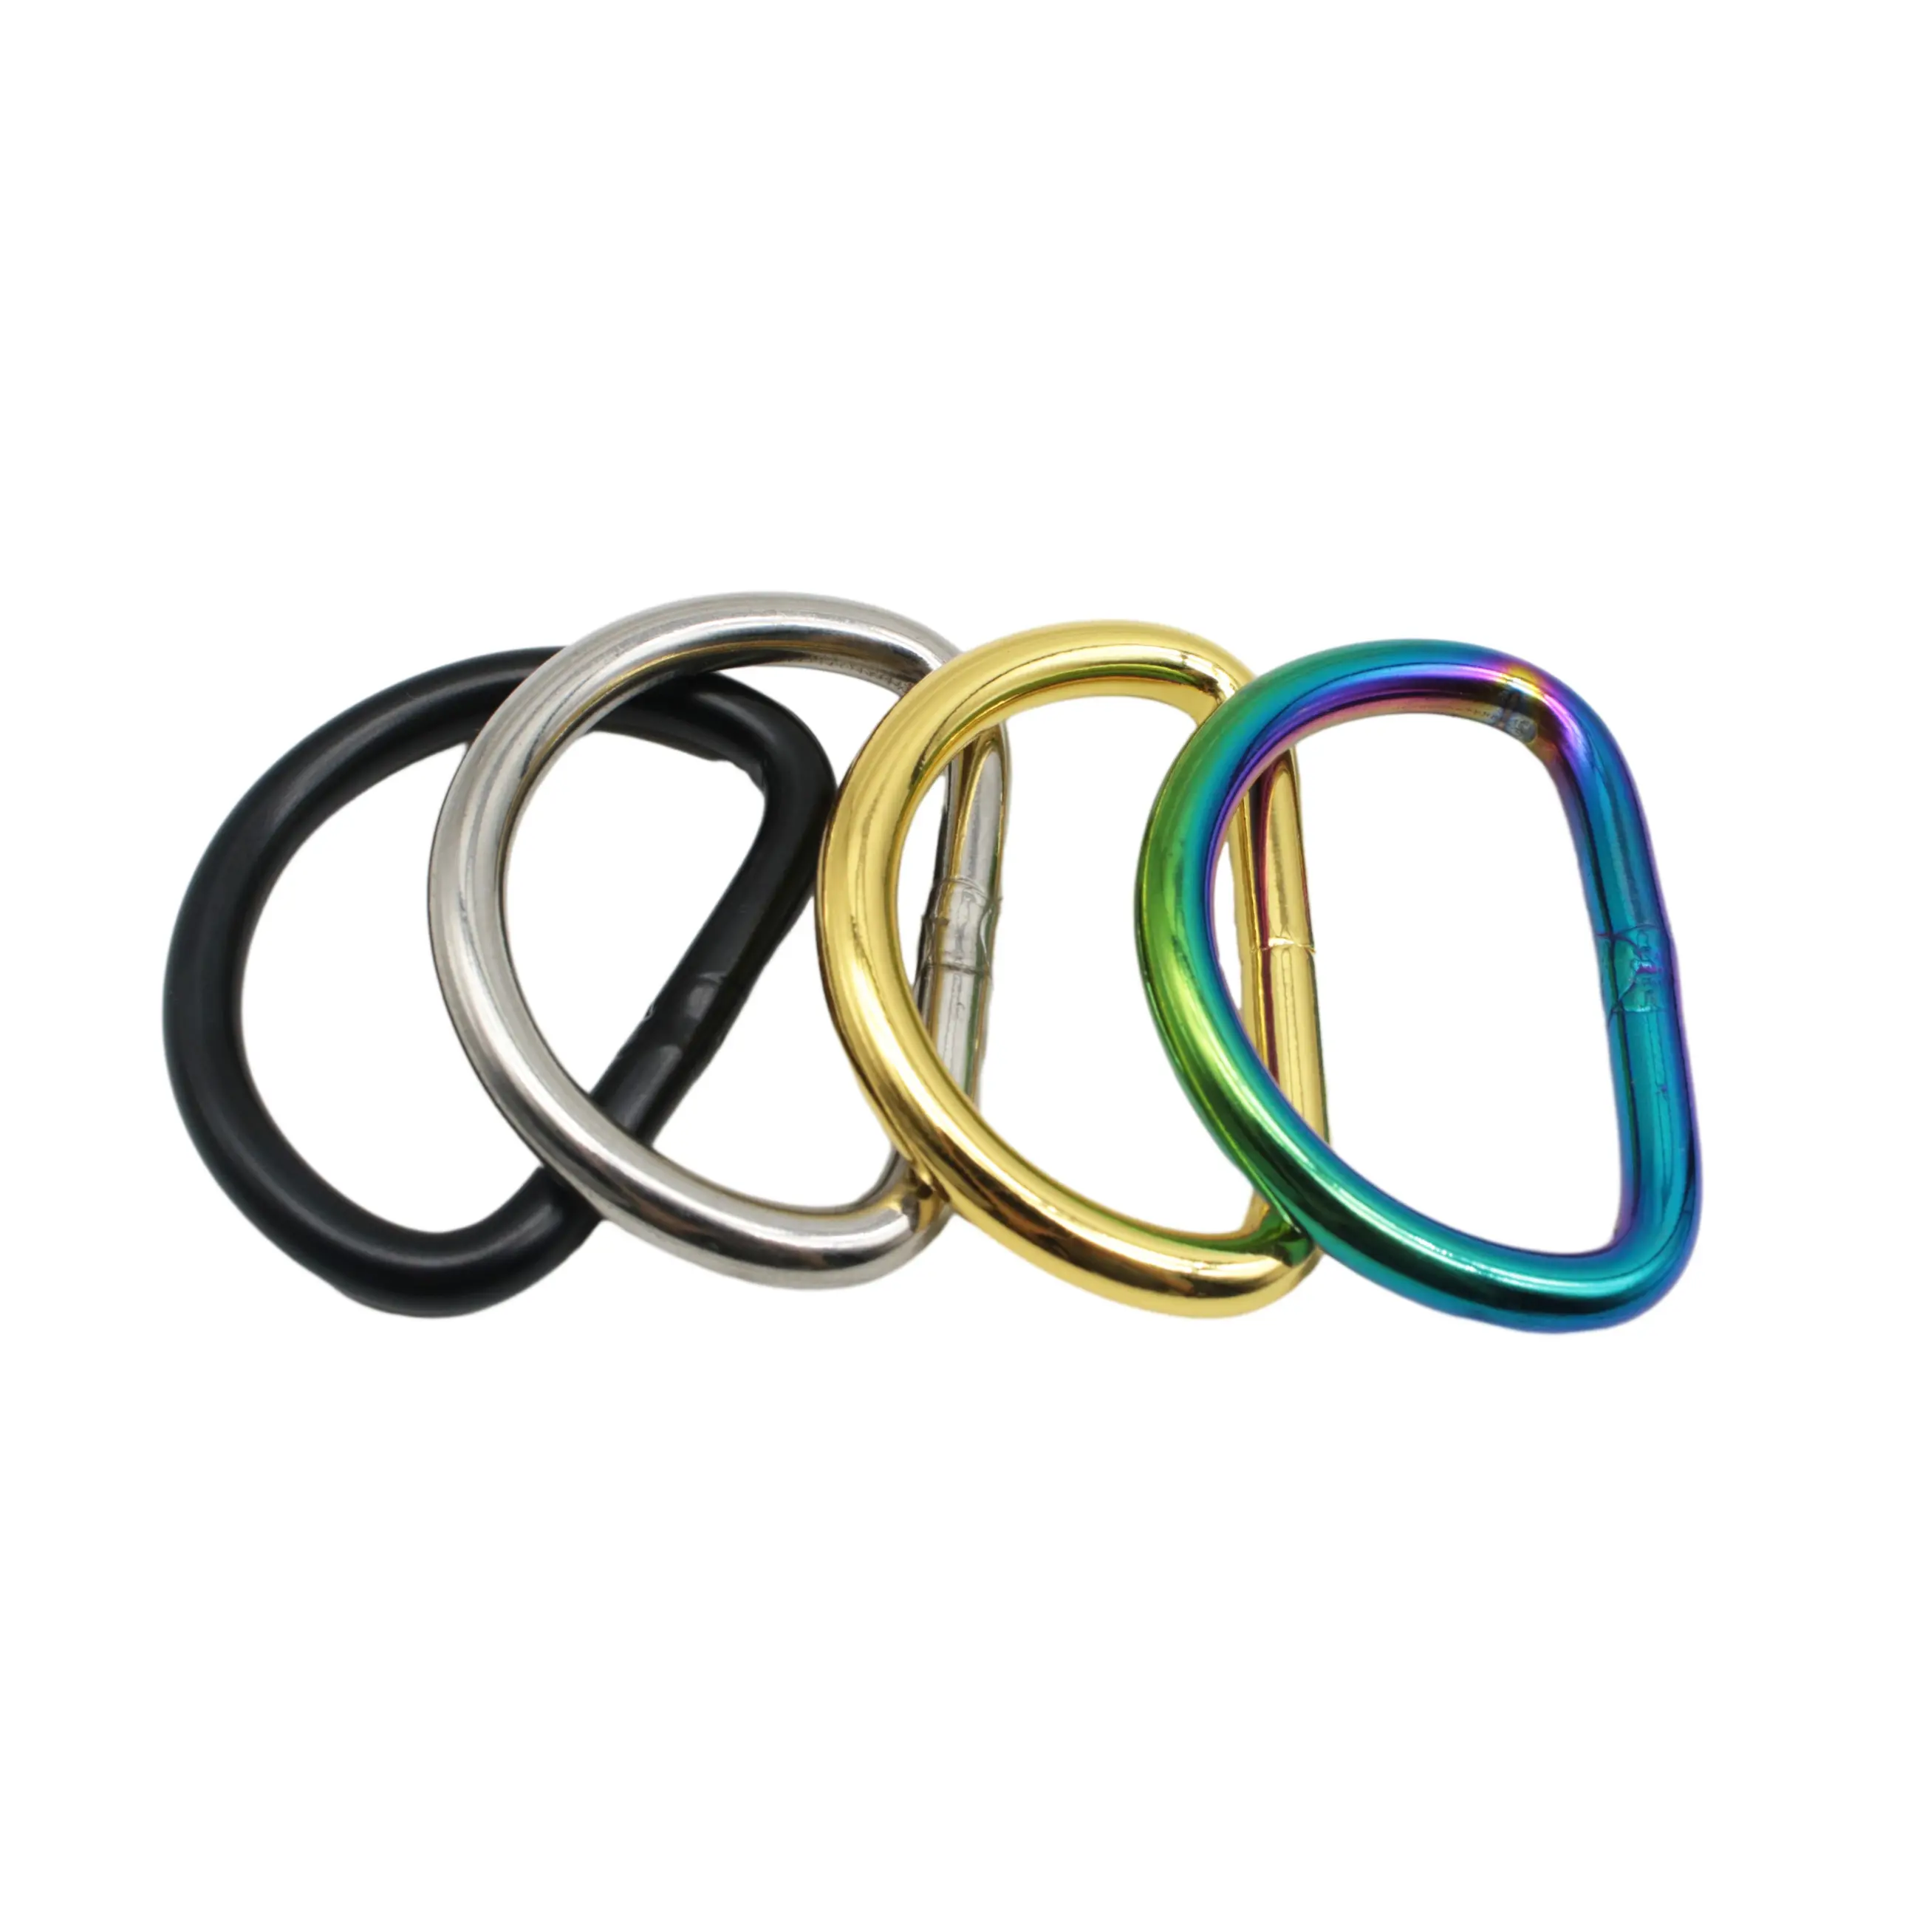 Batch Custom 15mm 20mm 25mm Multi Purpose Color Stainless Steel Buckle Metal D Ring For Tote Bag